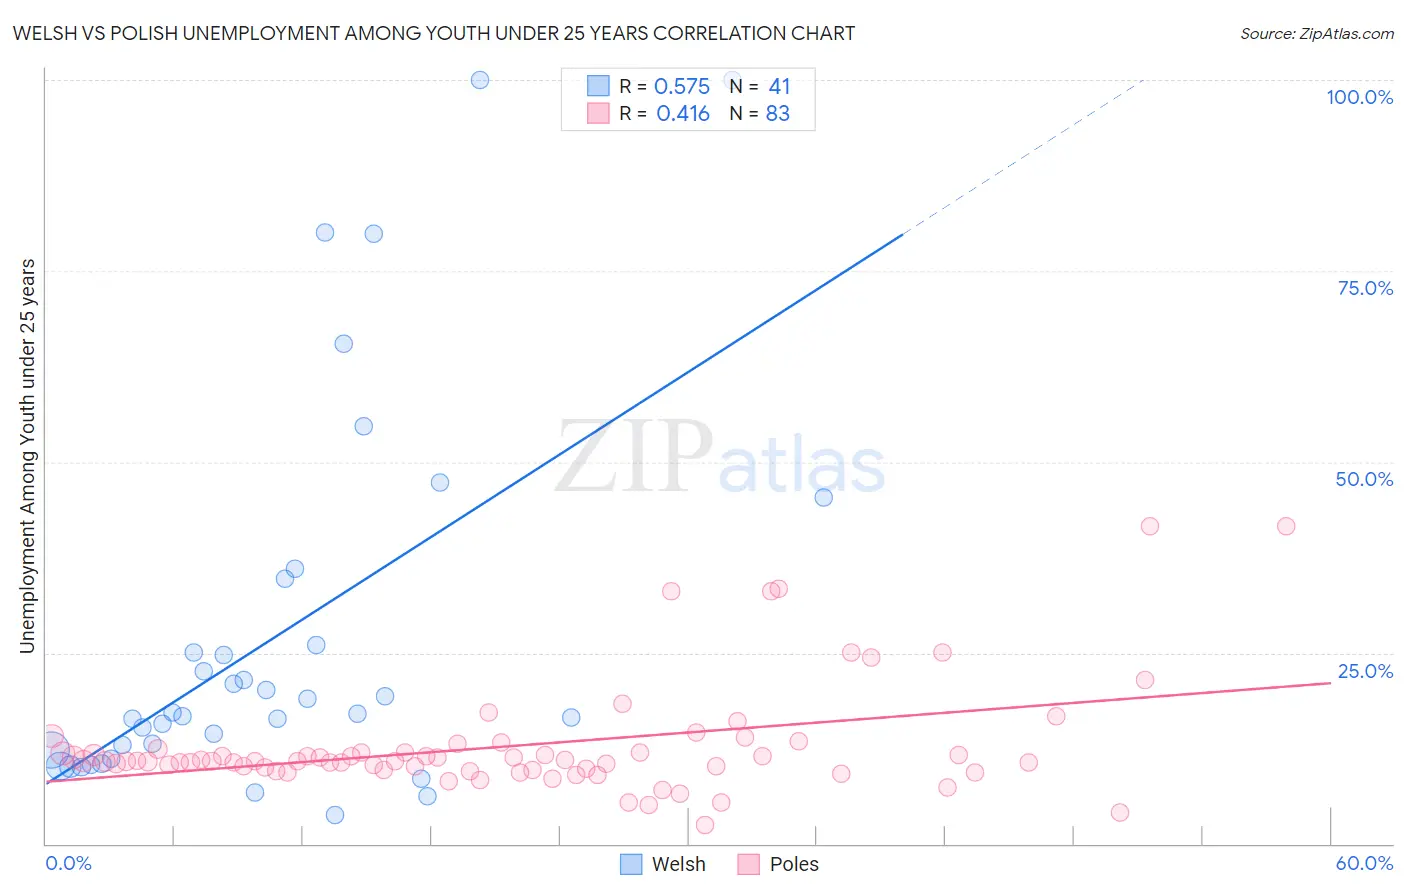 Welsh vs Polish Unemployment Among Youth under 25 years